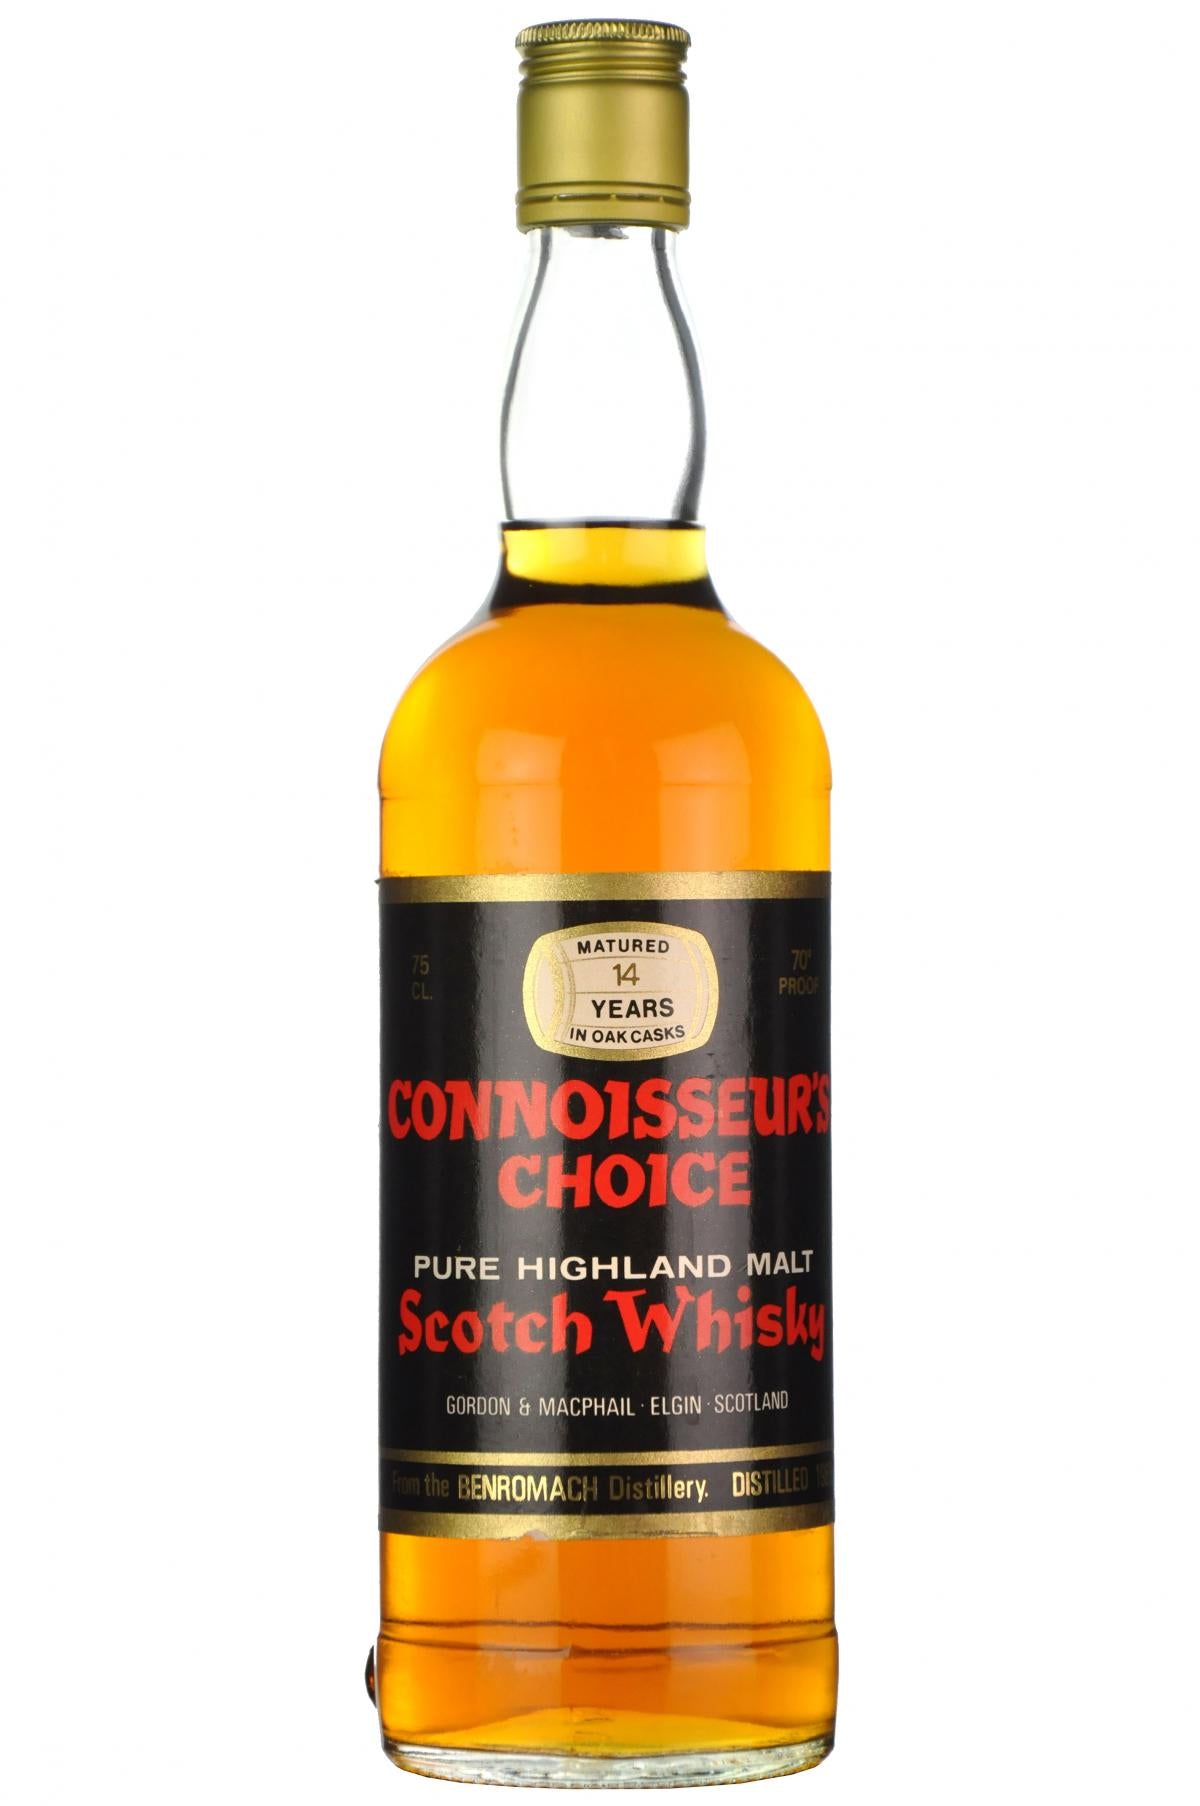 Benromach 1965 | 14 Year Old Connoisseurs Choice